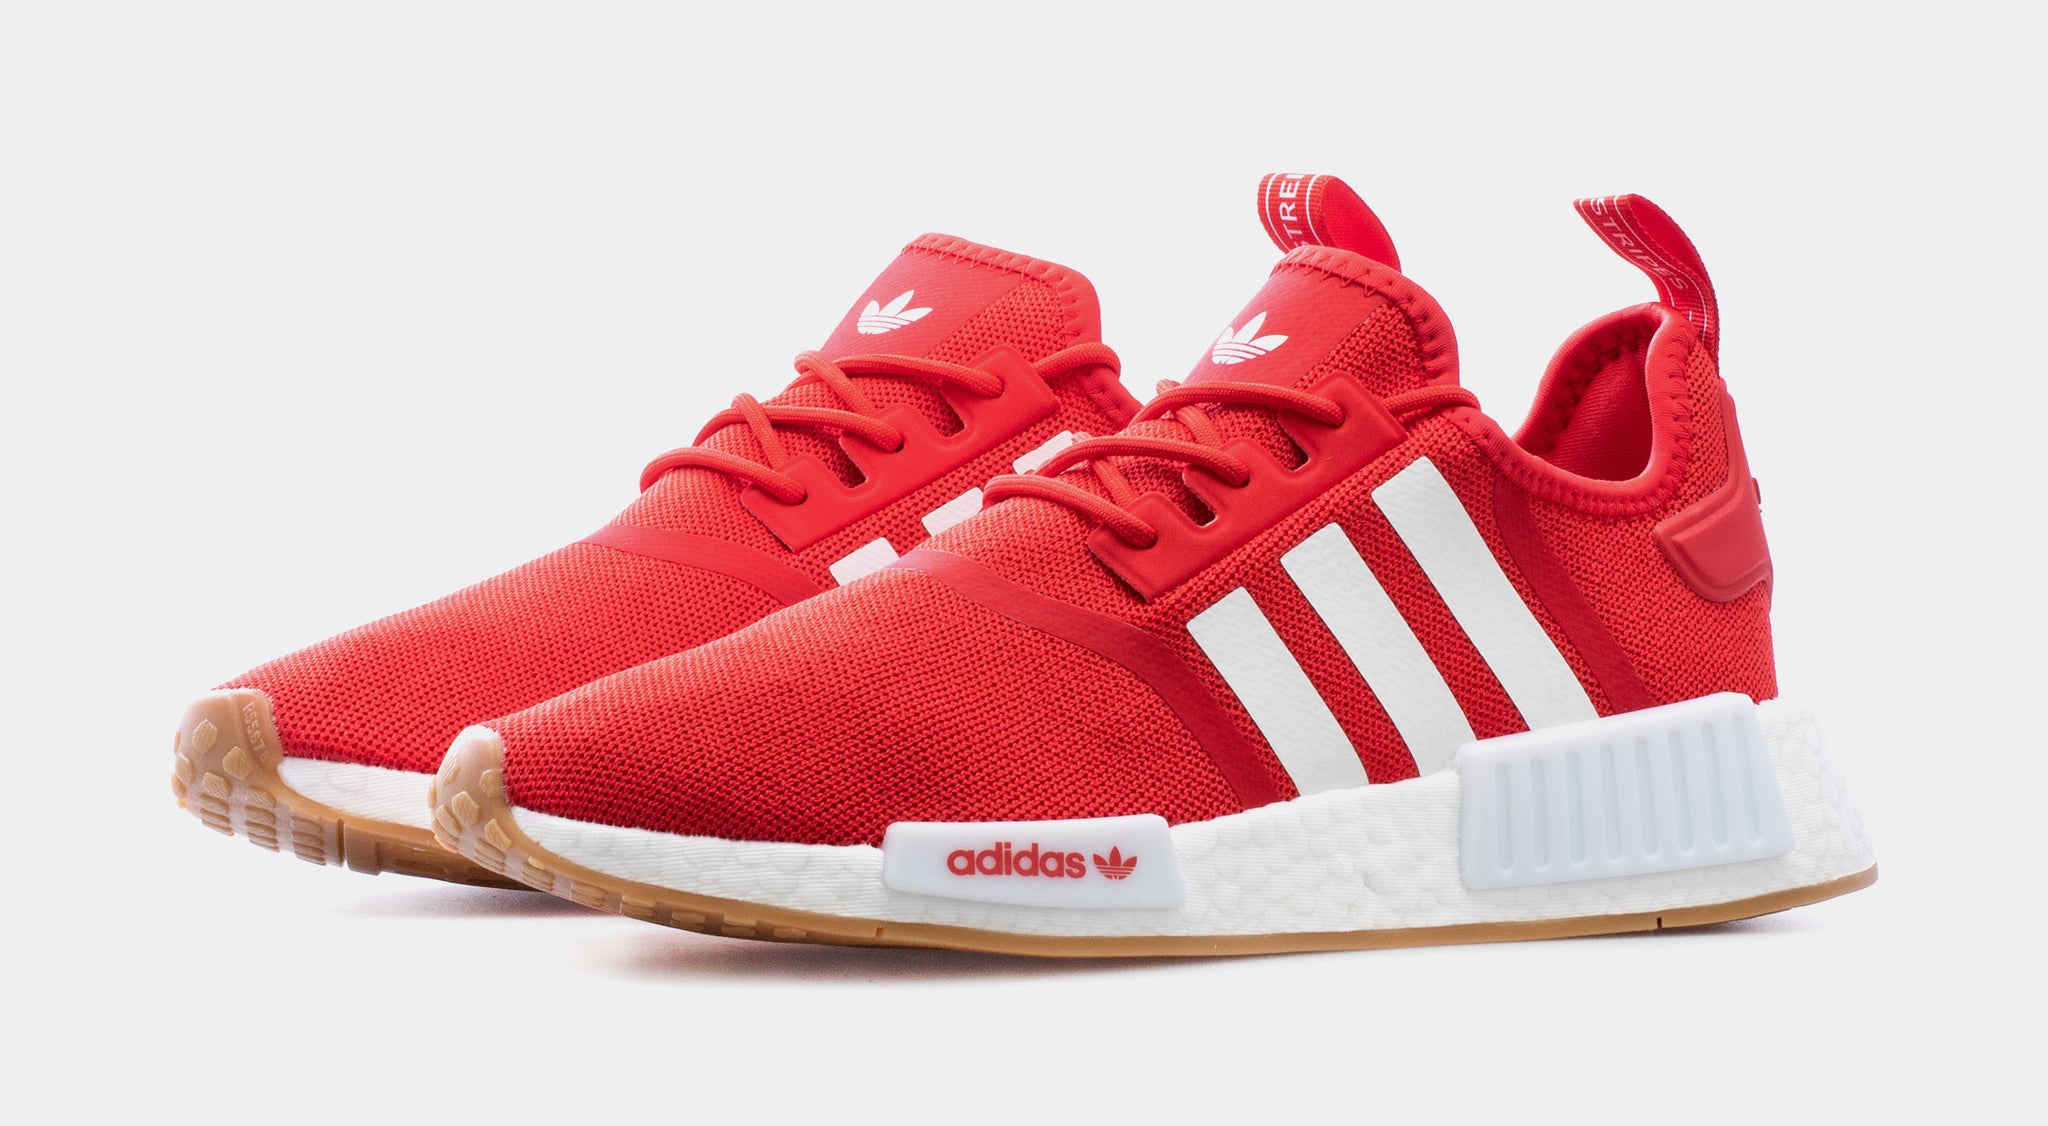 adidas NMD R1 Mens Lifestyle Shoes Red – Shoe